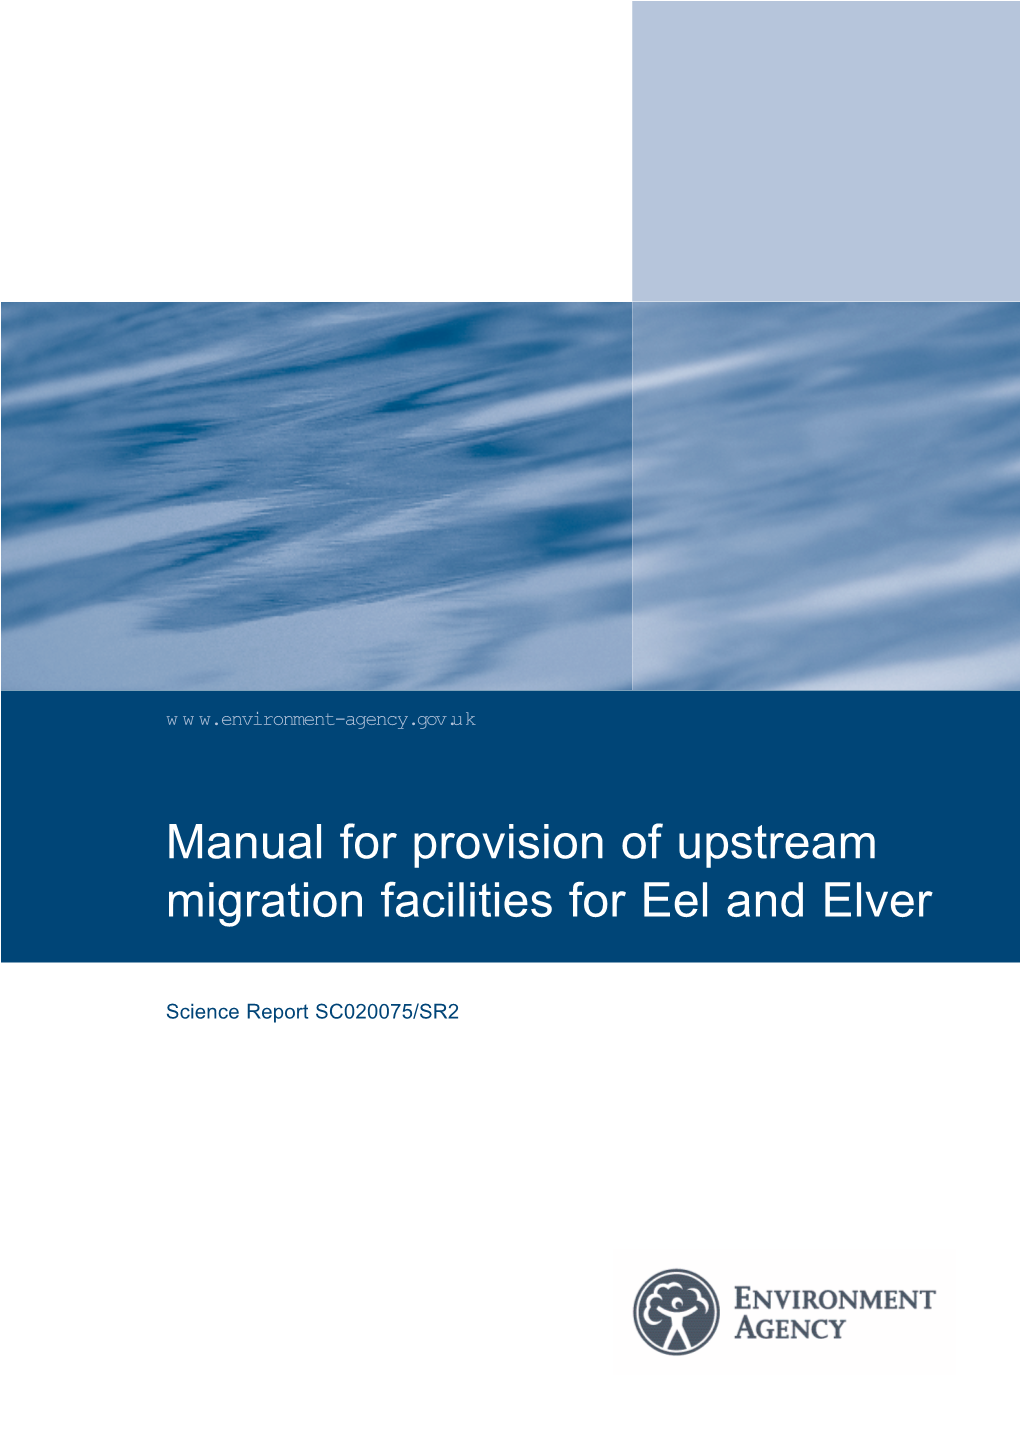 Manual for Provision of Upstream Migration Facilities for Eel and Elver